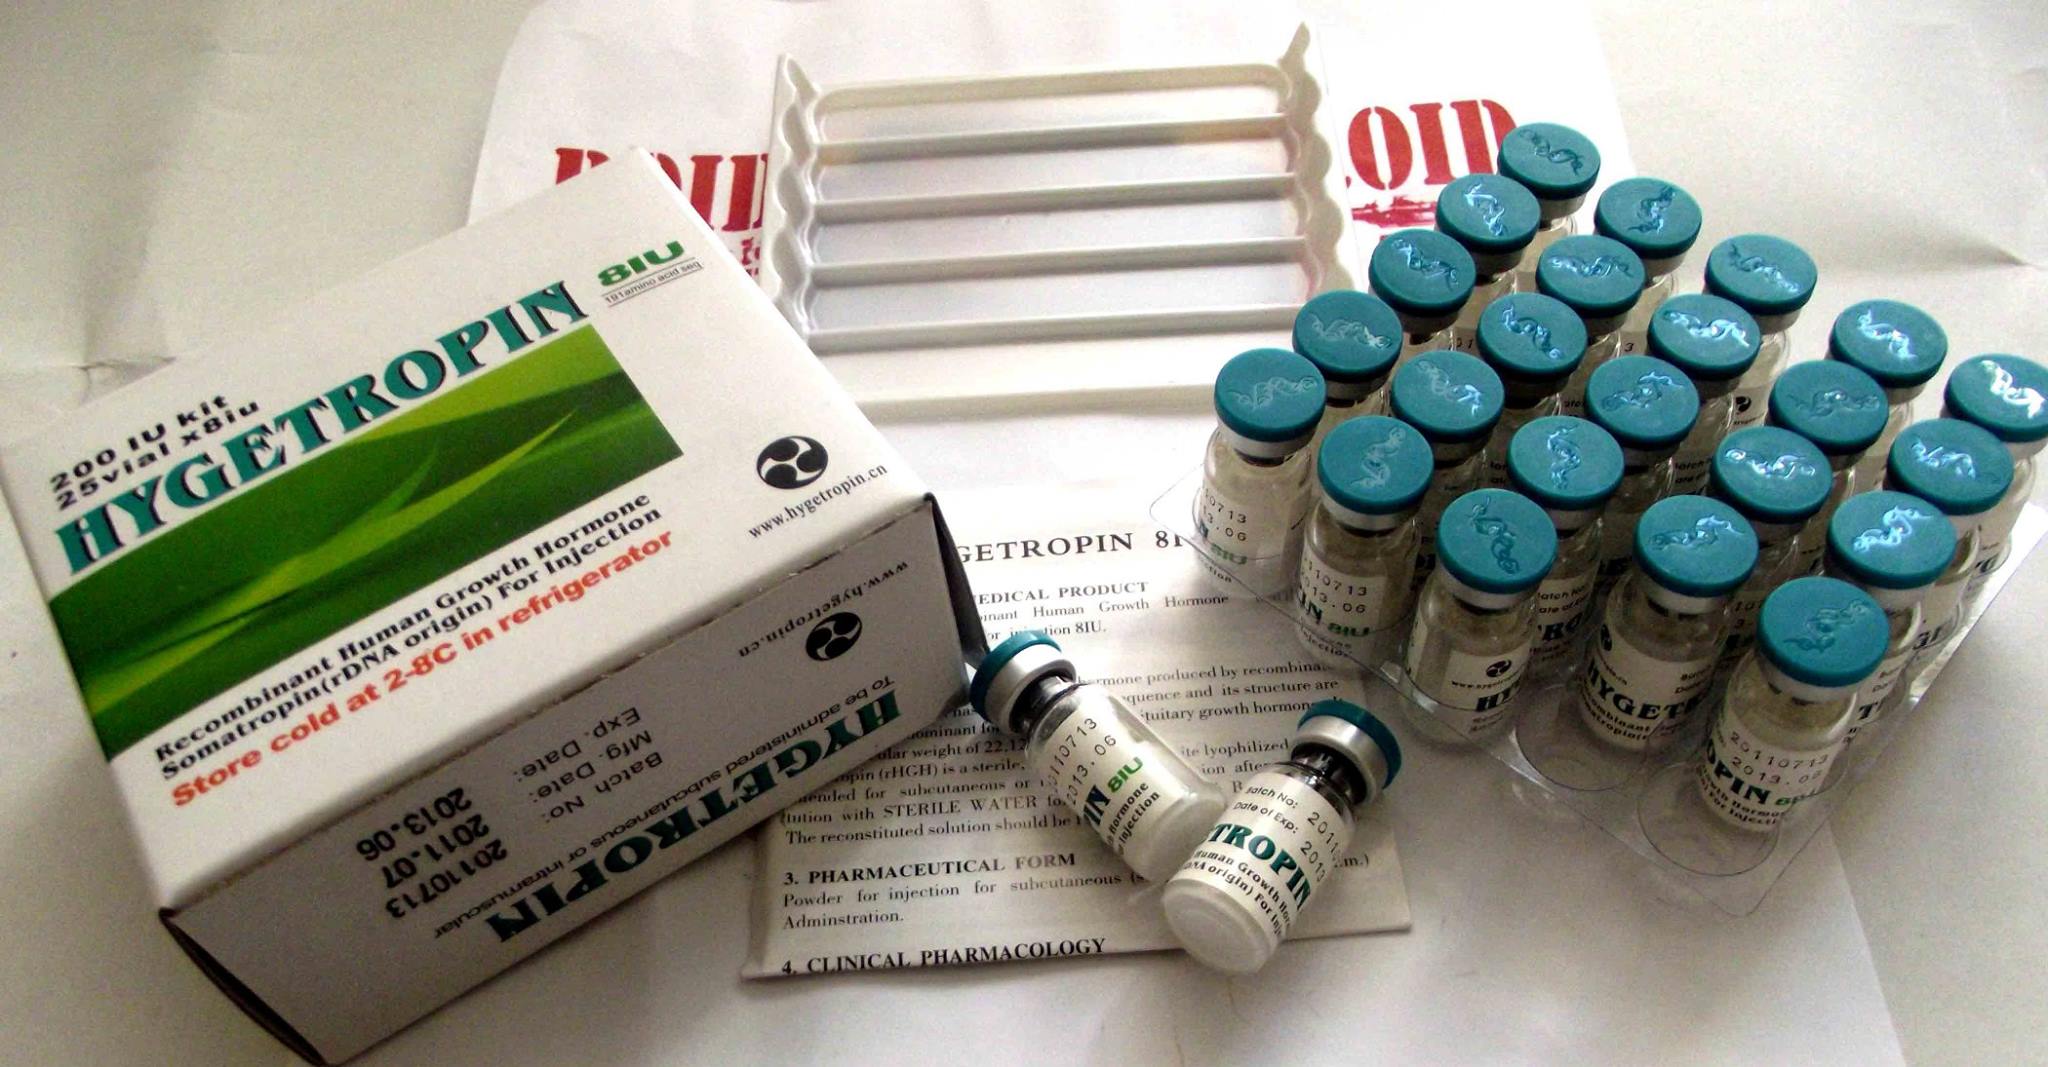 The Truth About Steroid Delivery: Injections And Pills